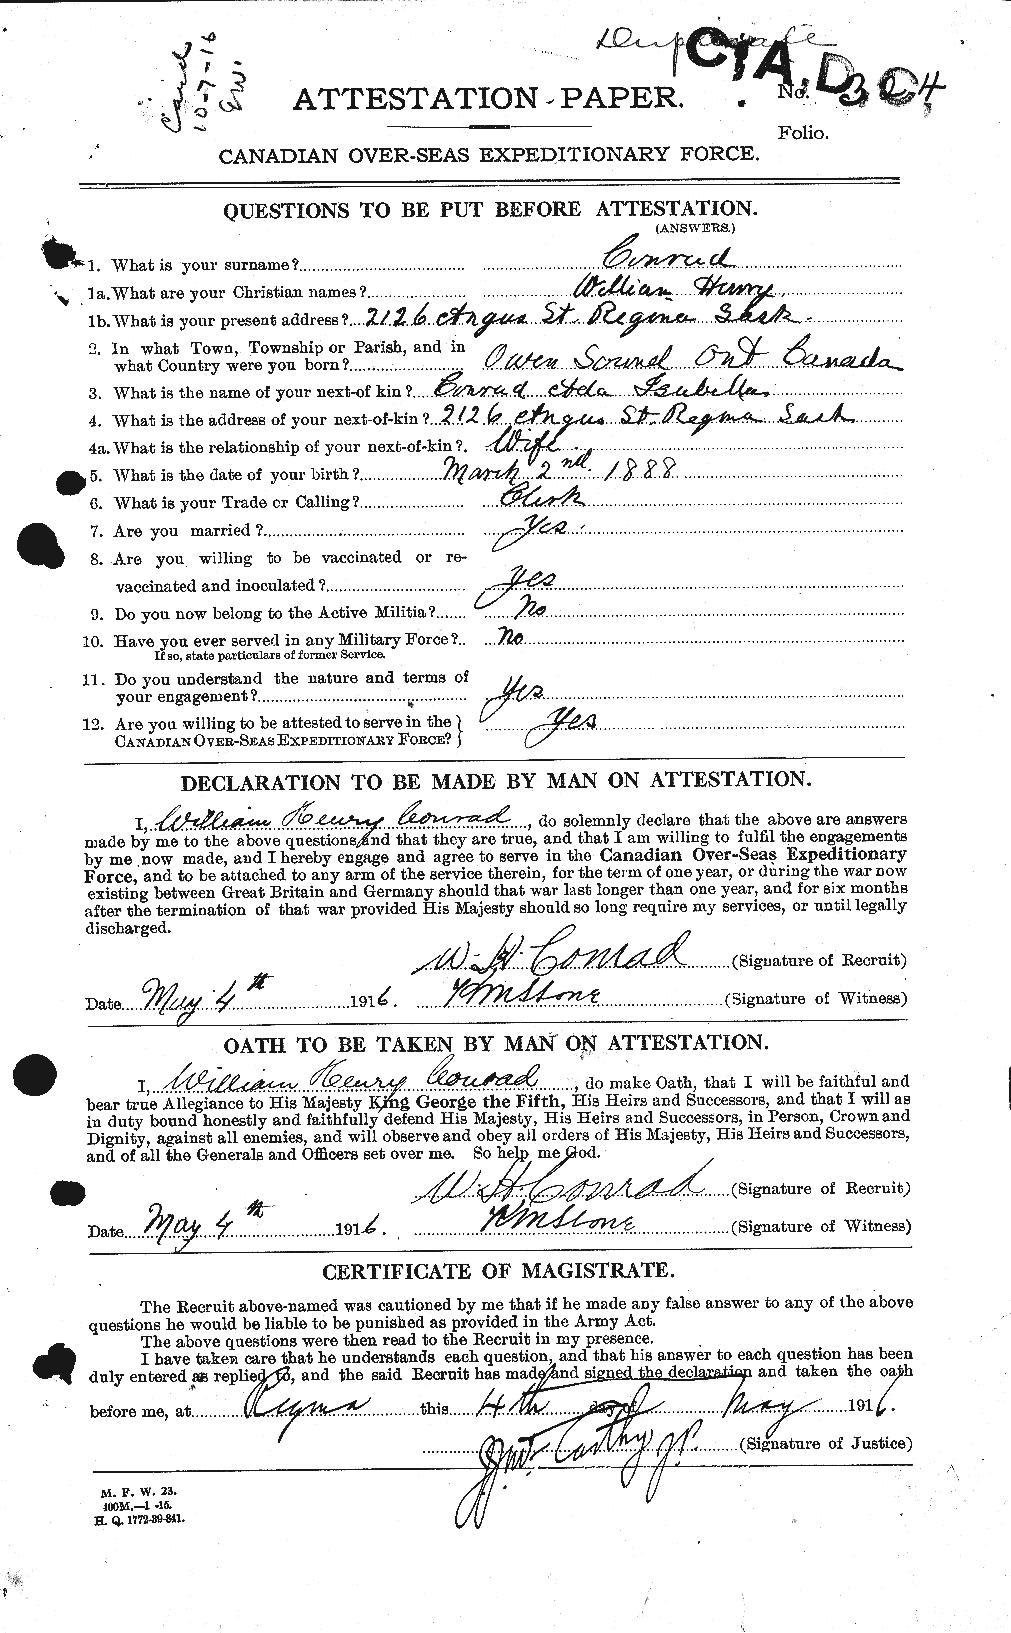 Personnel Records of the First World War - CEF 070836a